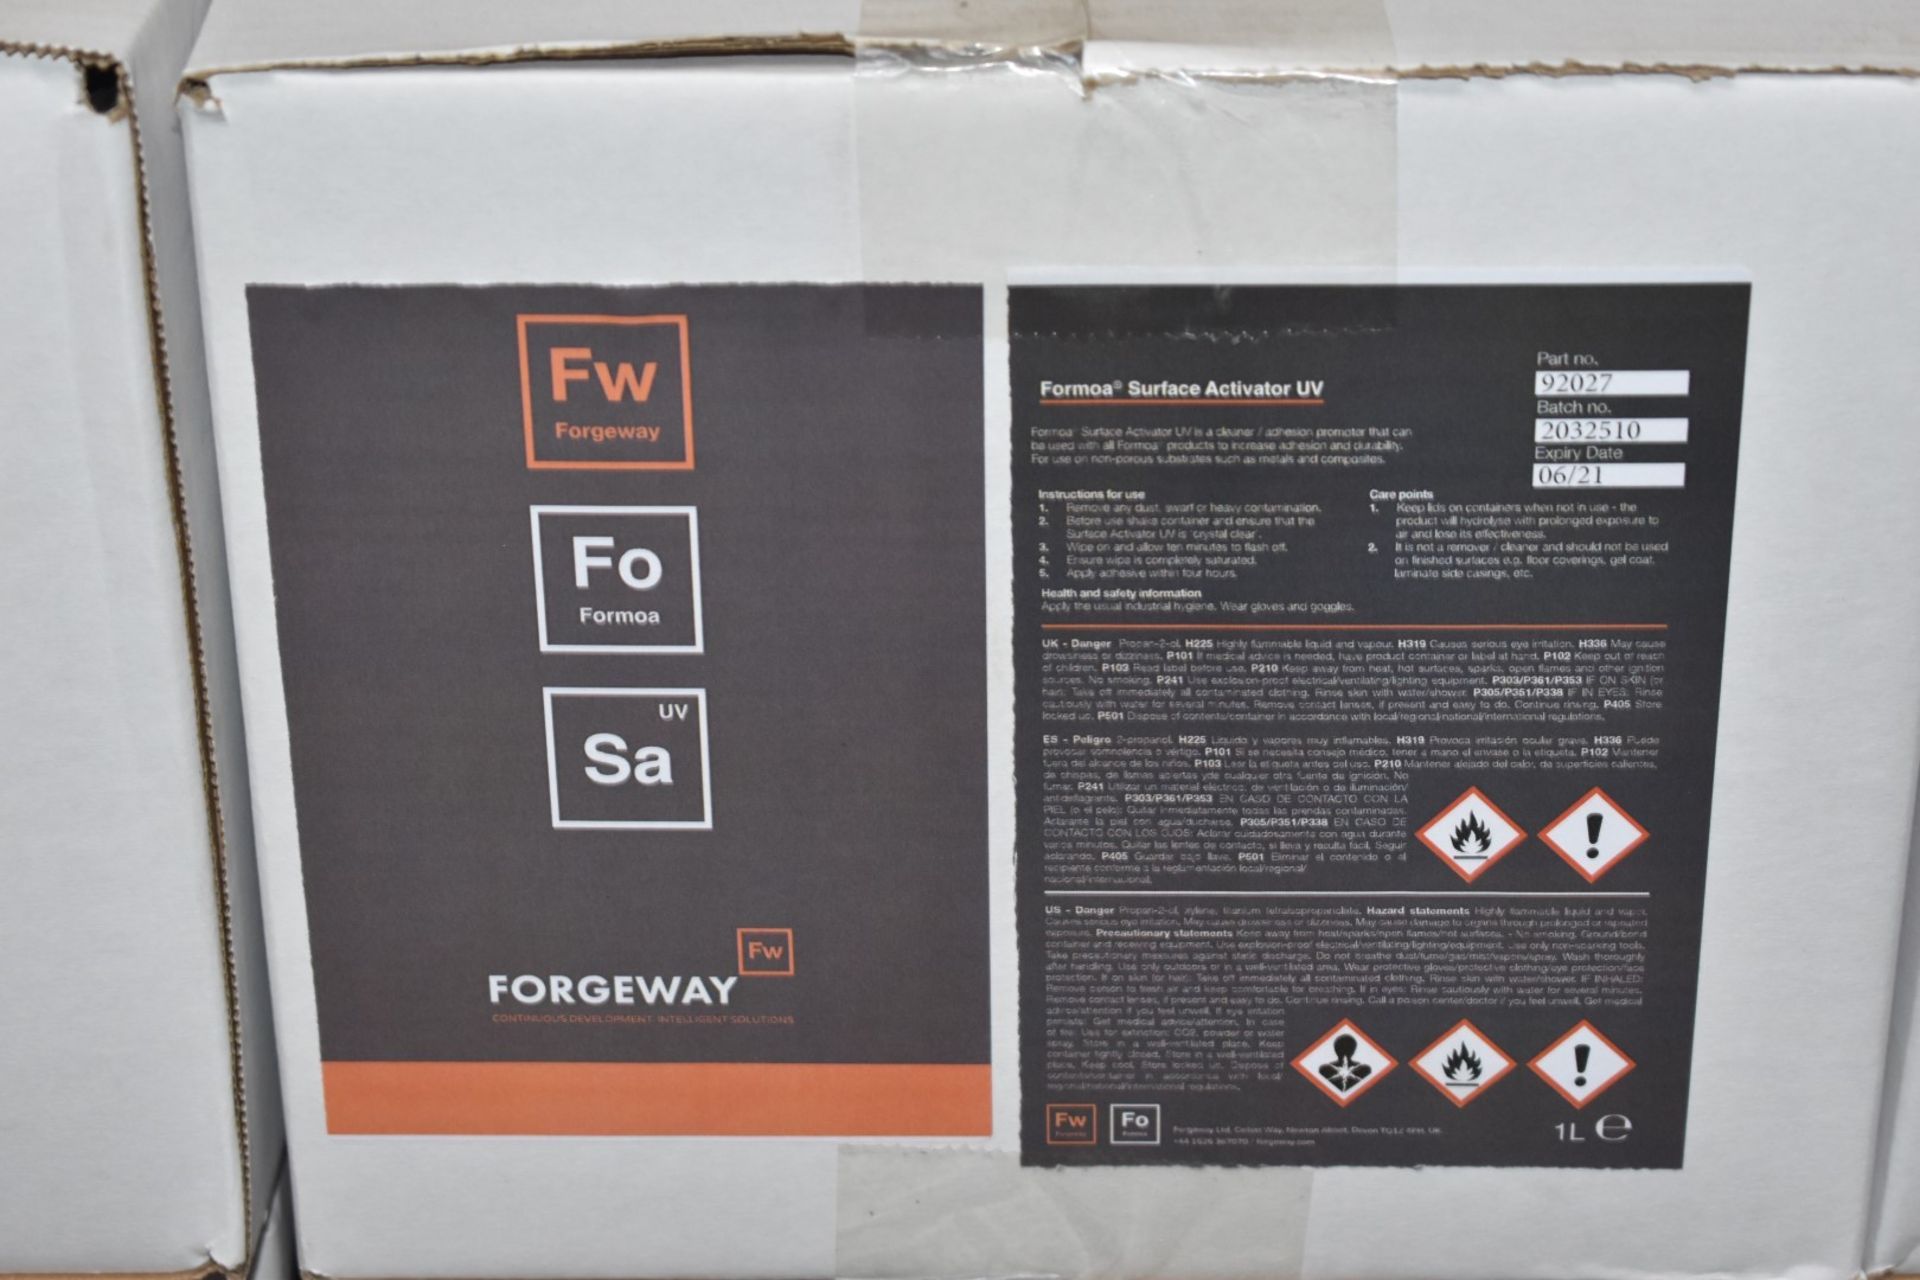 120 x Forgeway Formoa Surface Activator 1 Litre Containers - Adhesion Promotor, Cleaner, Degreaser - Image 6 of 6